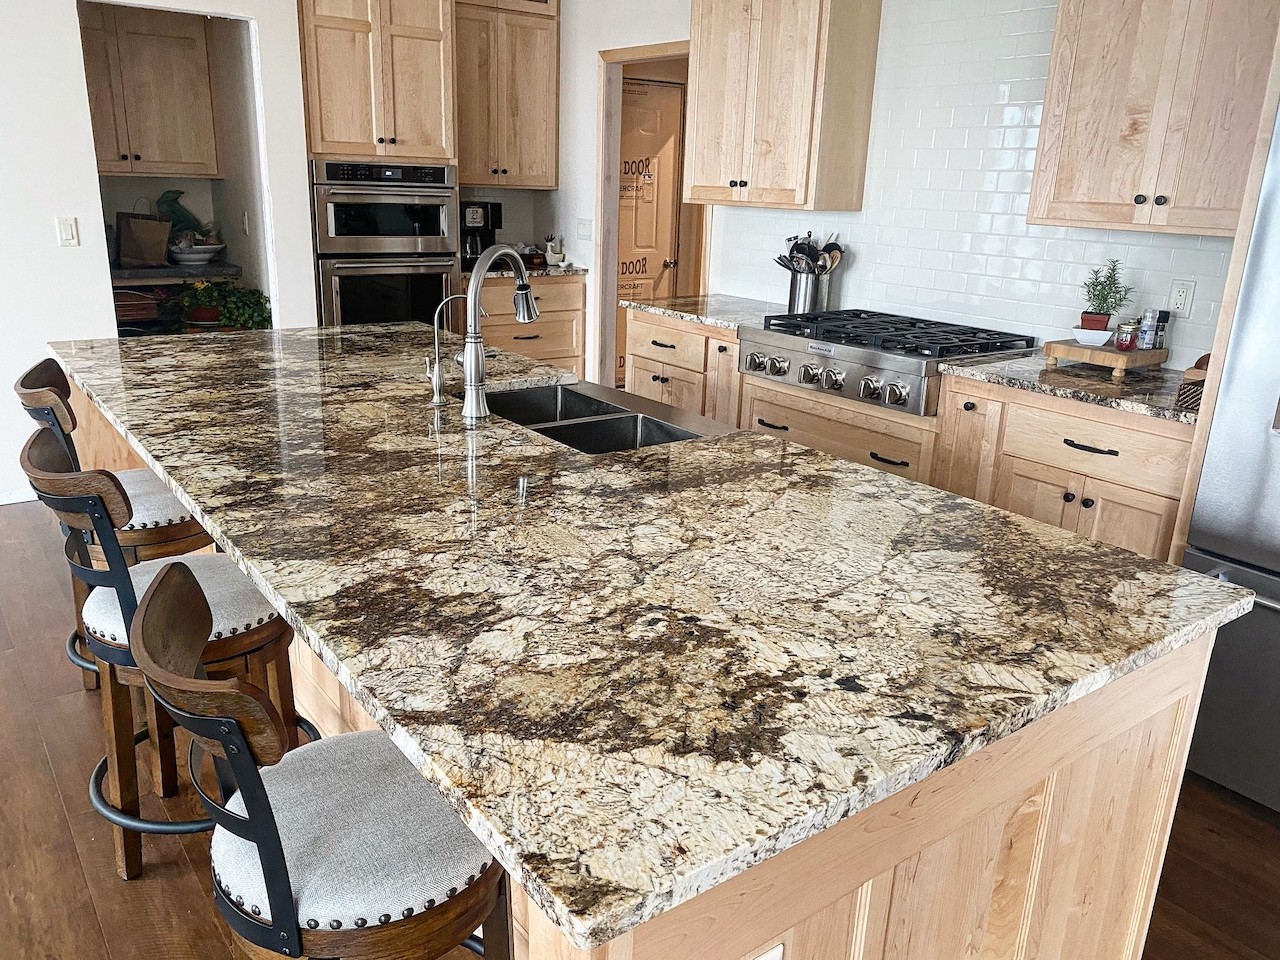 A kitchen with custom designed light wood cabinets, custom granite counter tops and stools.